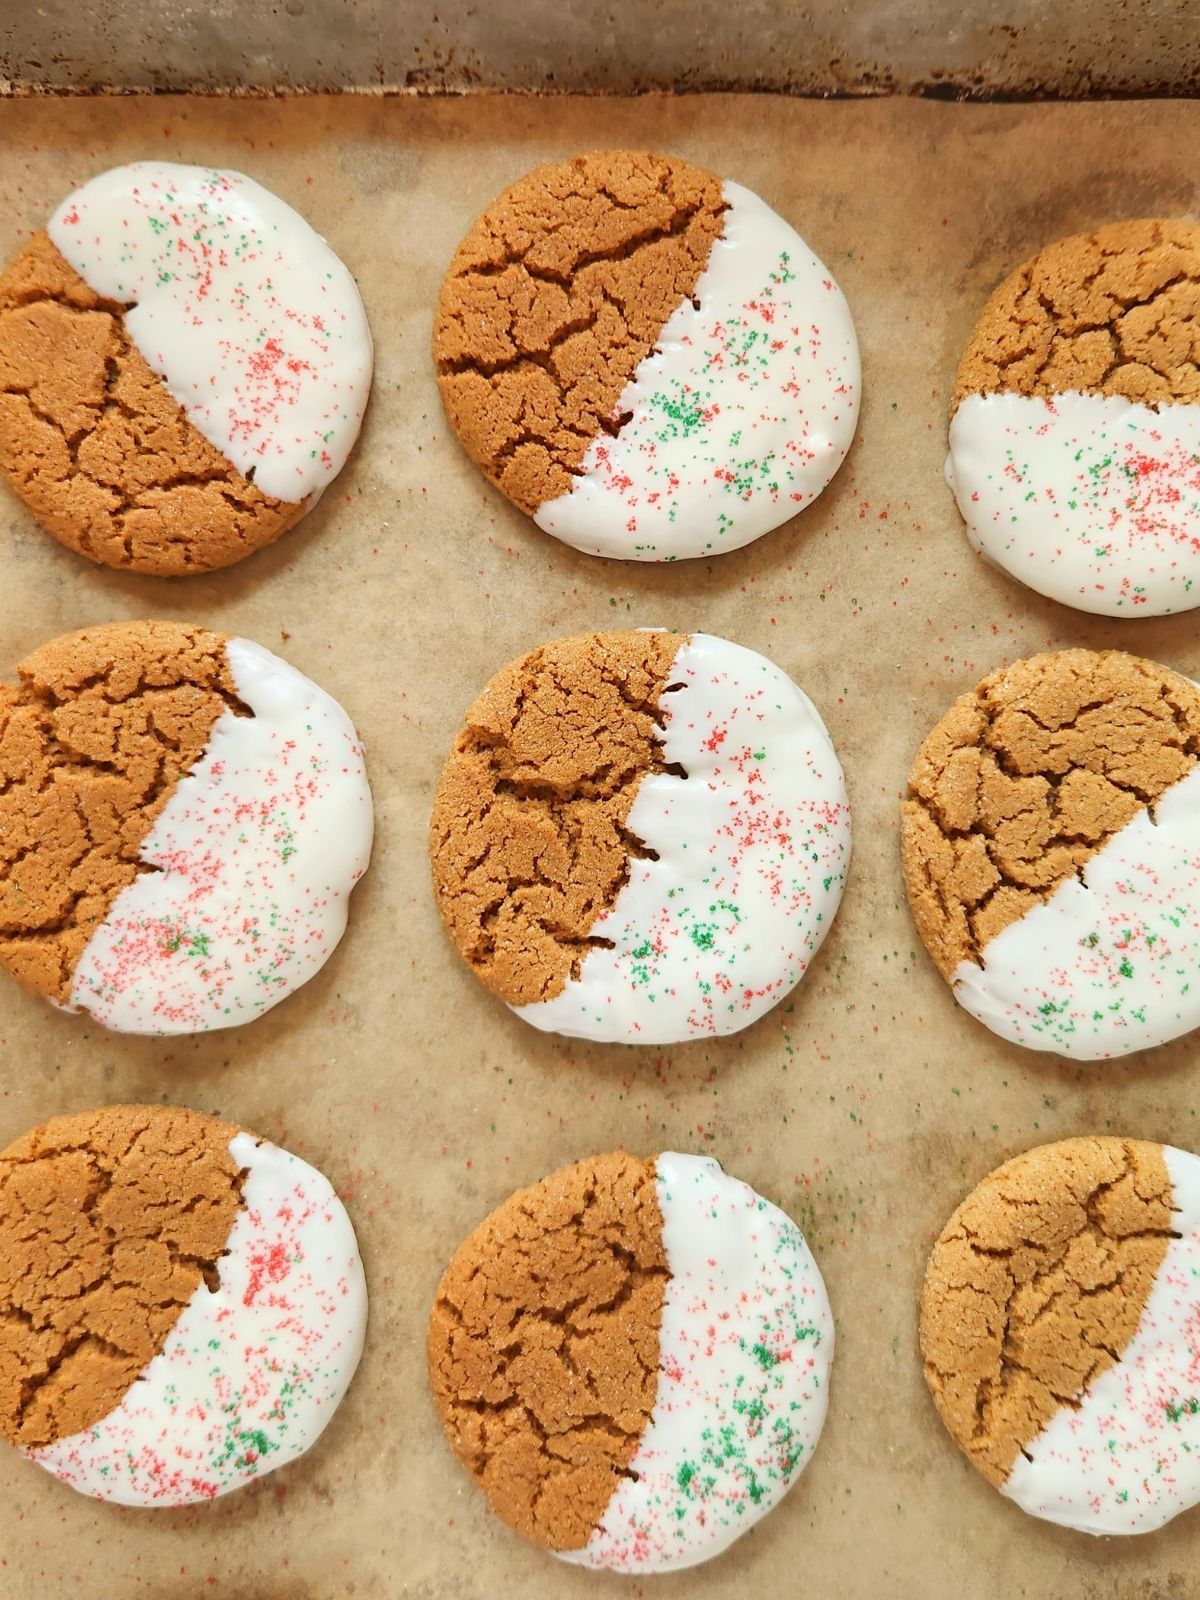 Iced Gingerbread Cookies on baking tray with parchment paper.